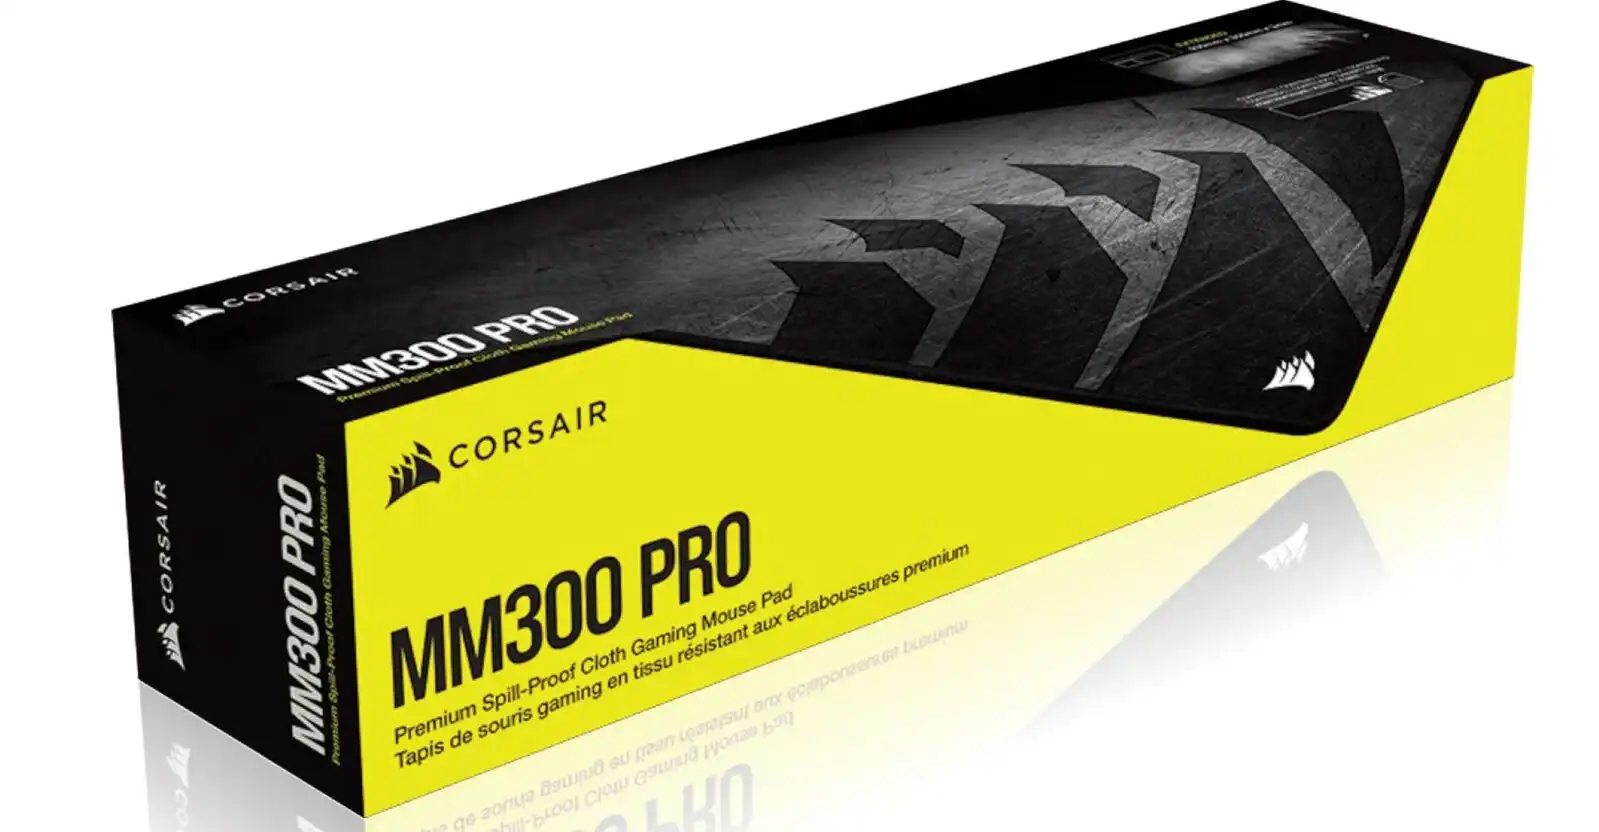 Corsair MM300 PRO Premium Extended Cloth Gaming Mat Mouse Pad f/ Keyboard/Mice